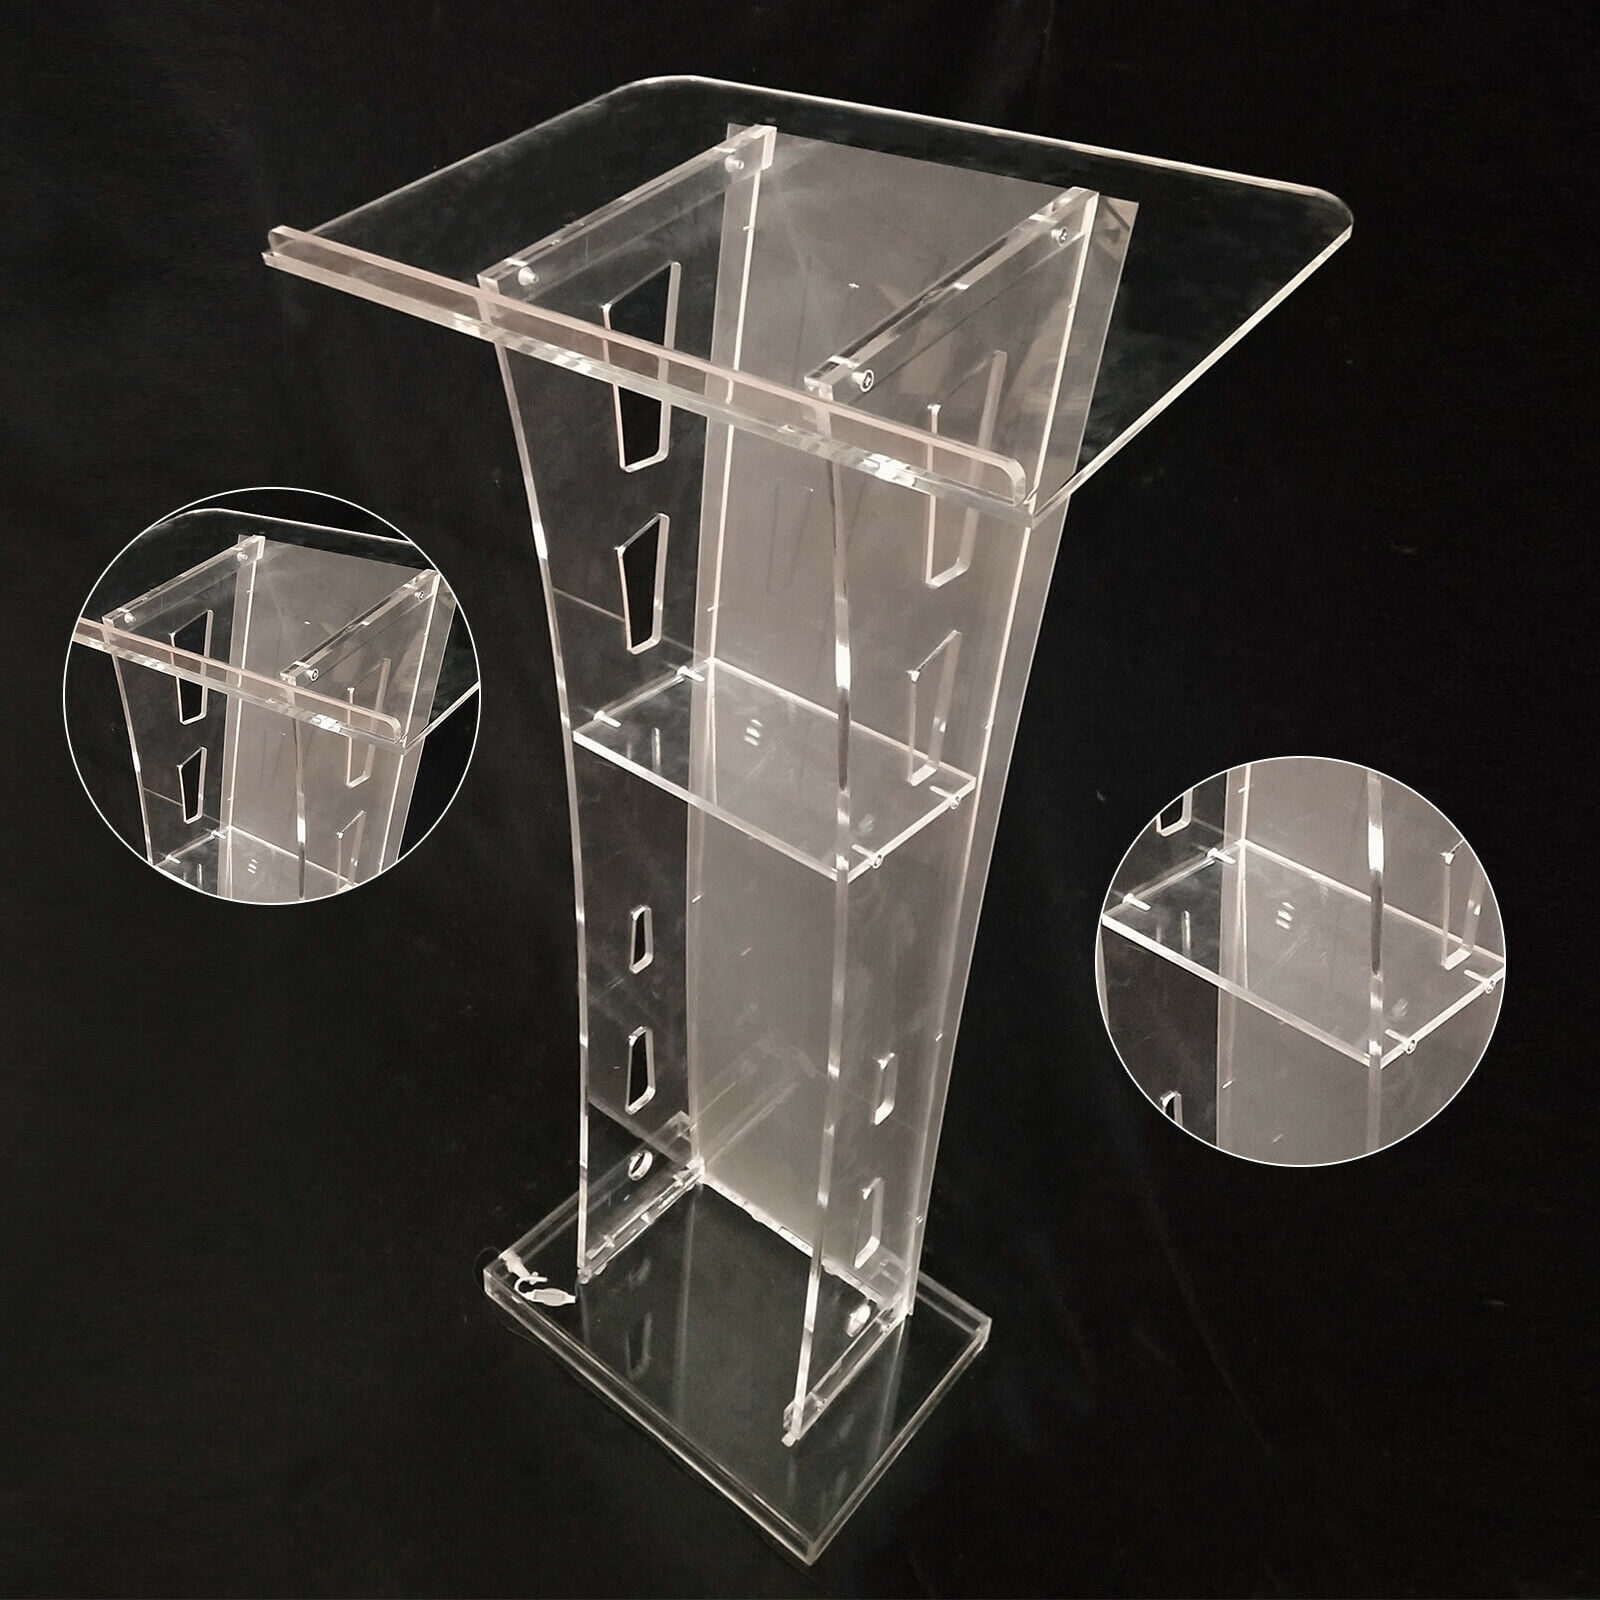 Conference Rooms Celebrations Weddings Portable Tabletop Podium Stand Desktop Lectern Podium Church Podium Pulpit for Speeches Clear Acrylic Table Top Podium Tabletop Small Pulpit for Churches 